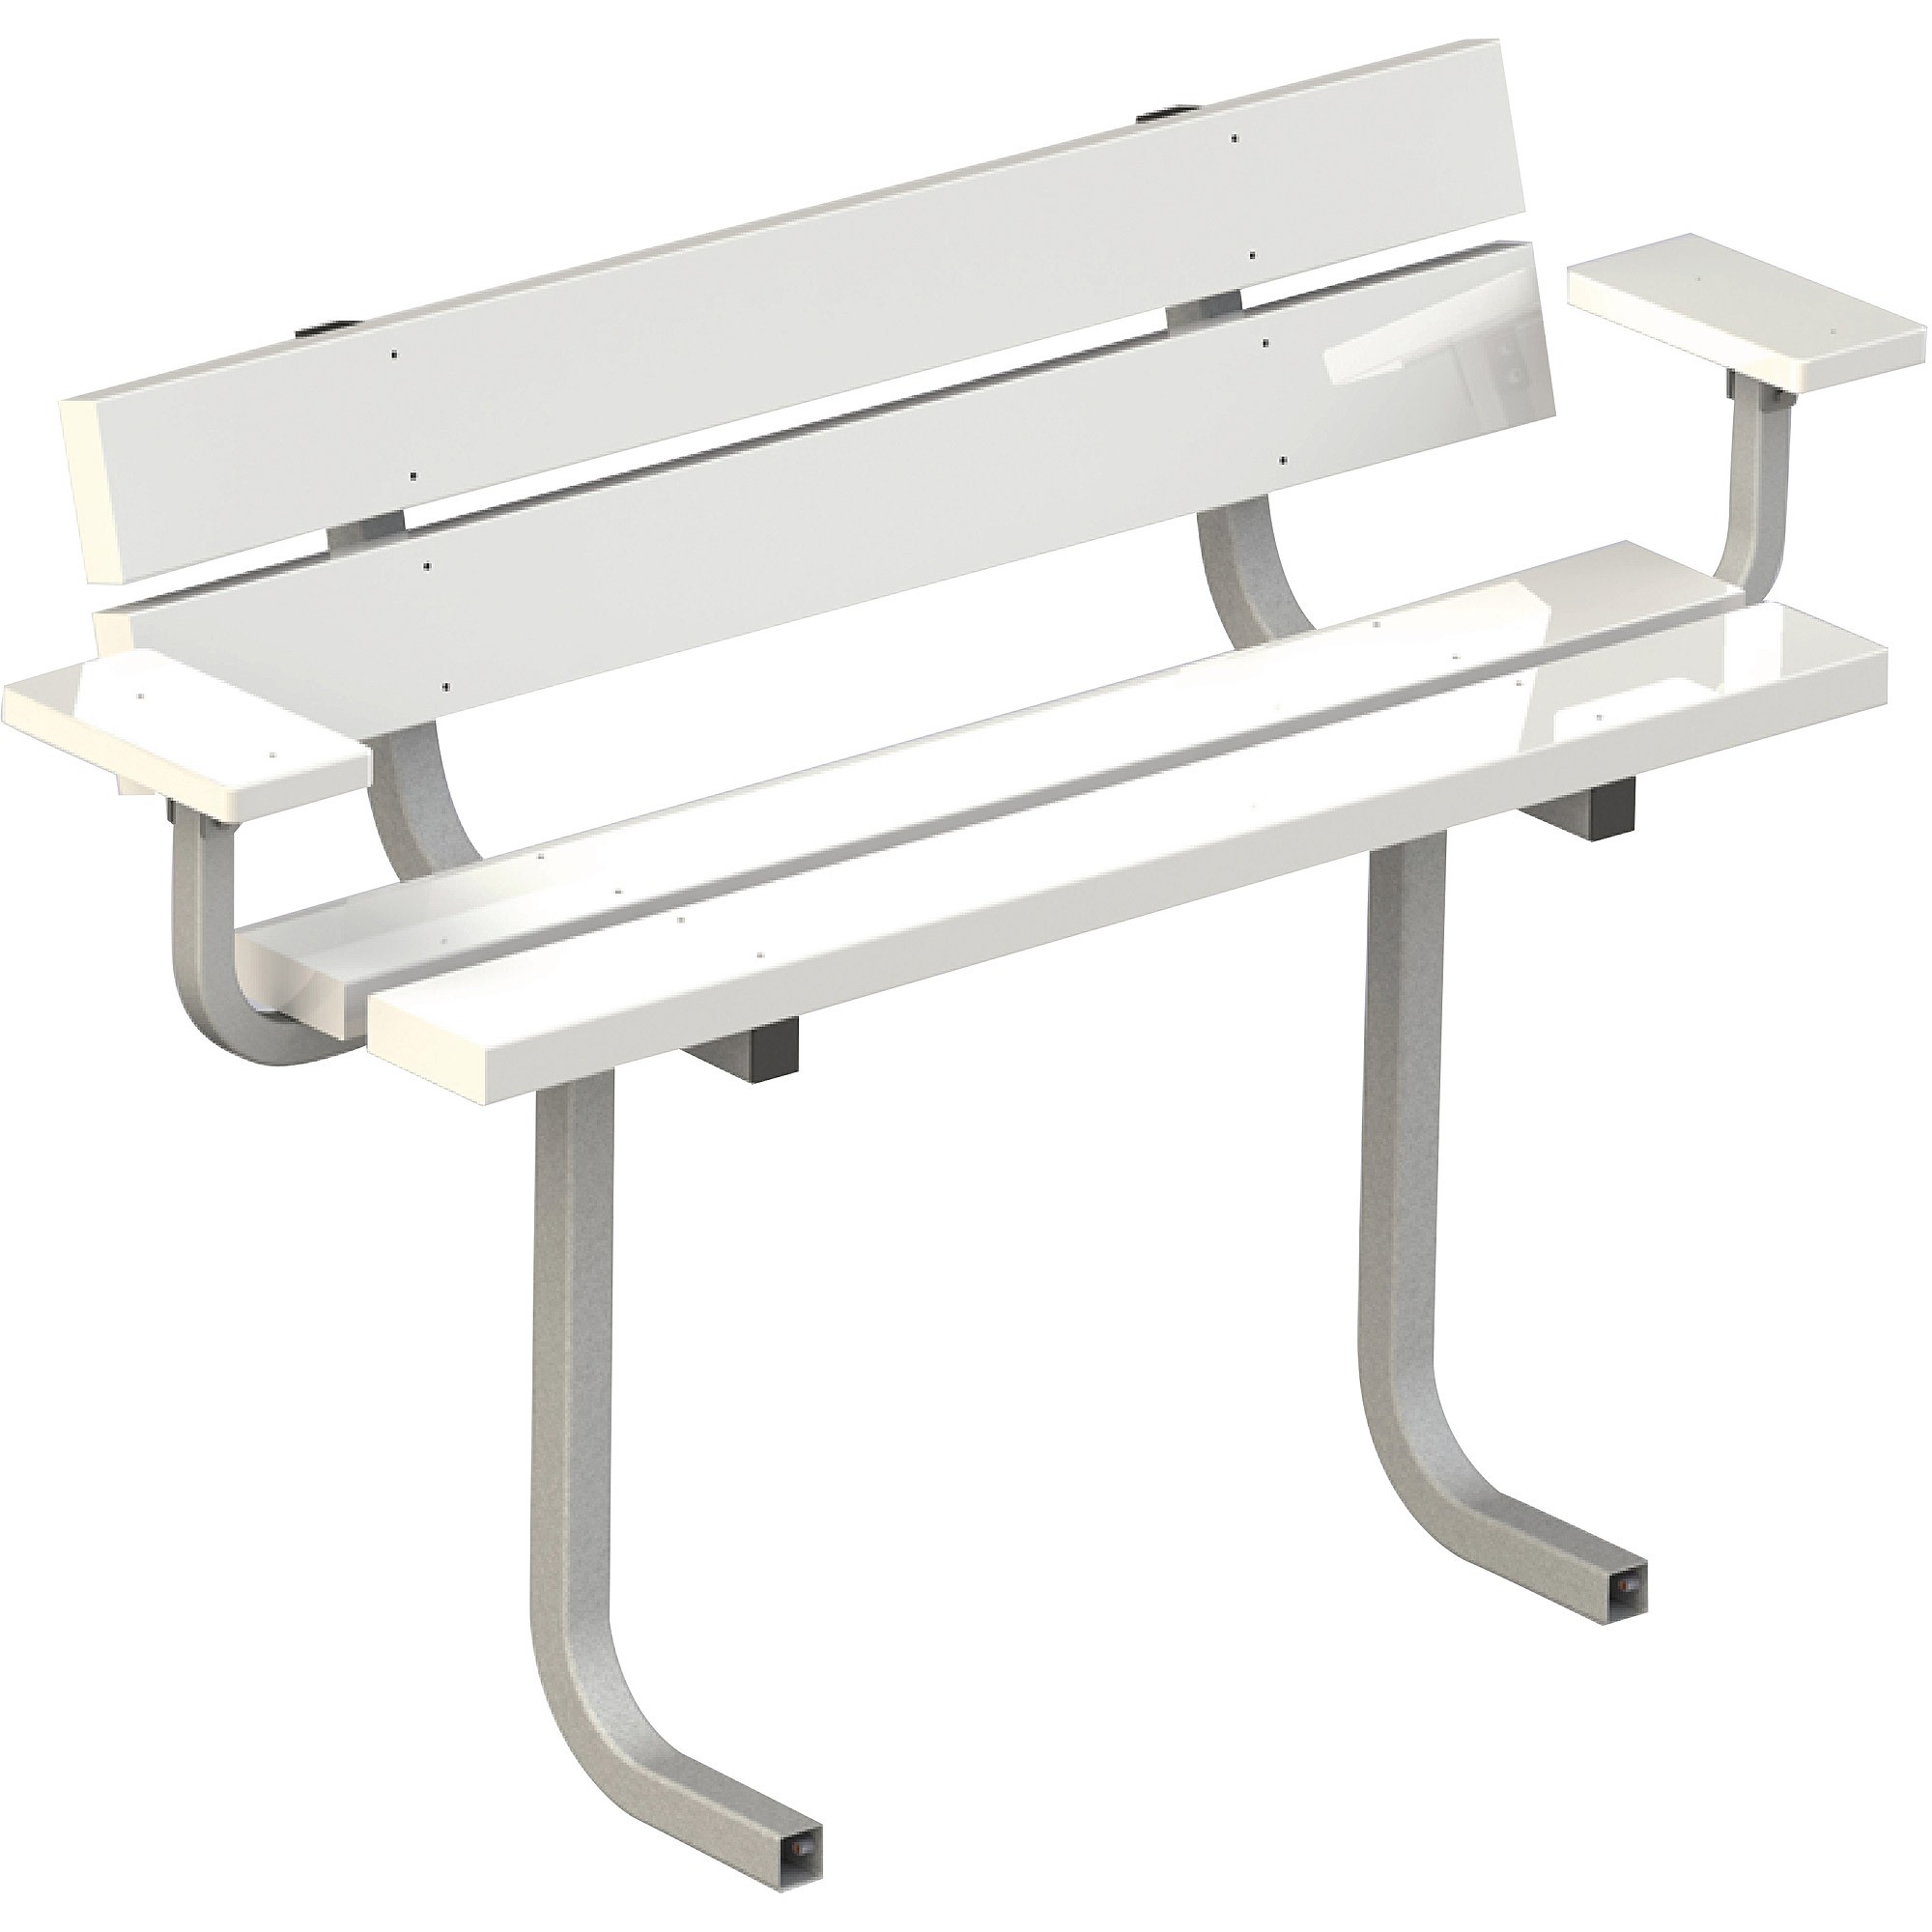 Tie down engineering dock side bench structure